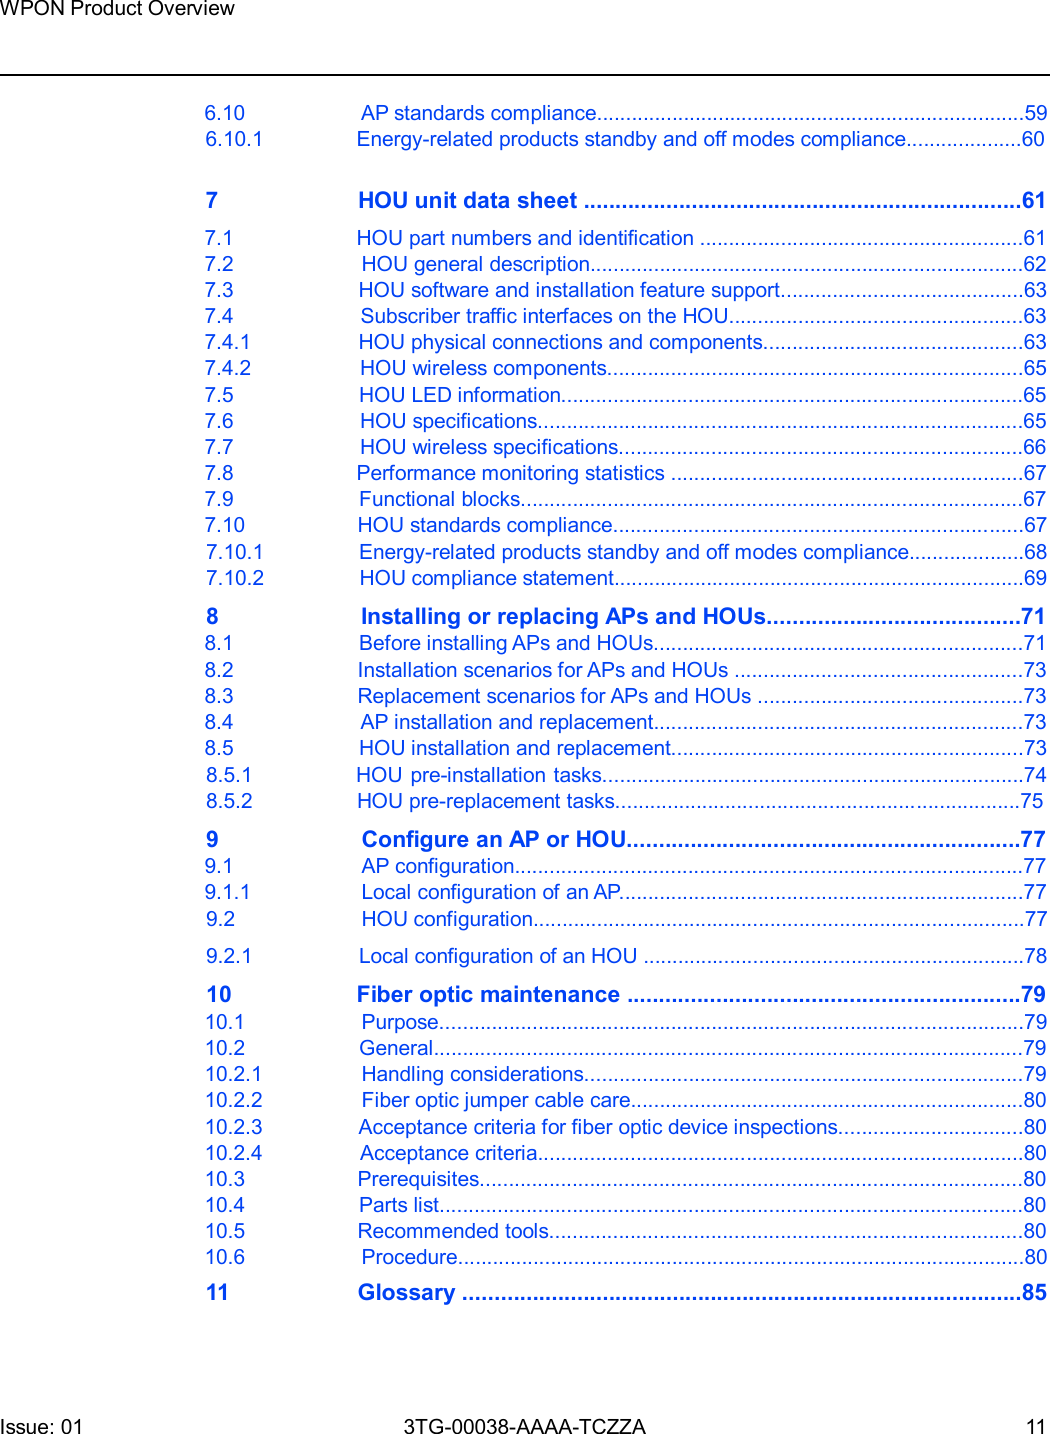 Page 11 of Nokia Bell 7577WPONAPDC WPON User Manual WPON Product Overview